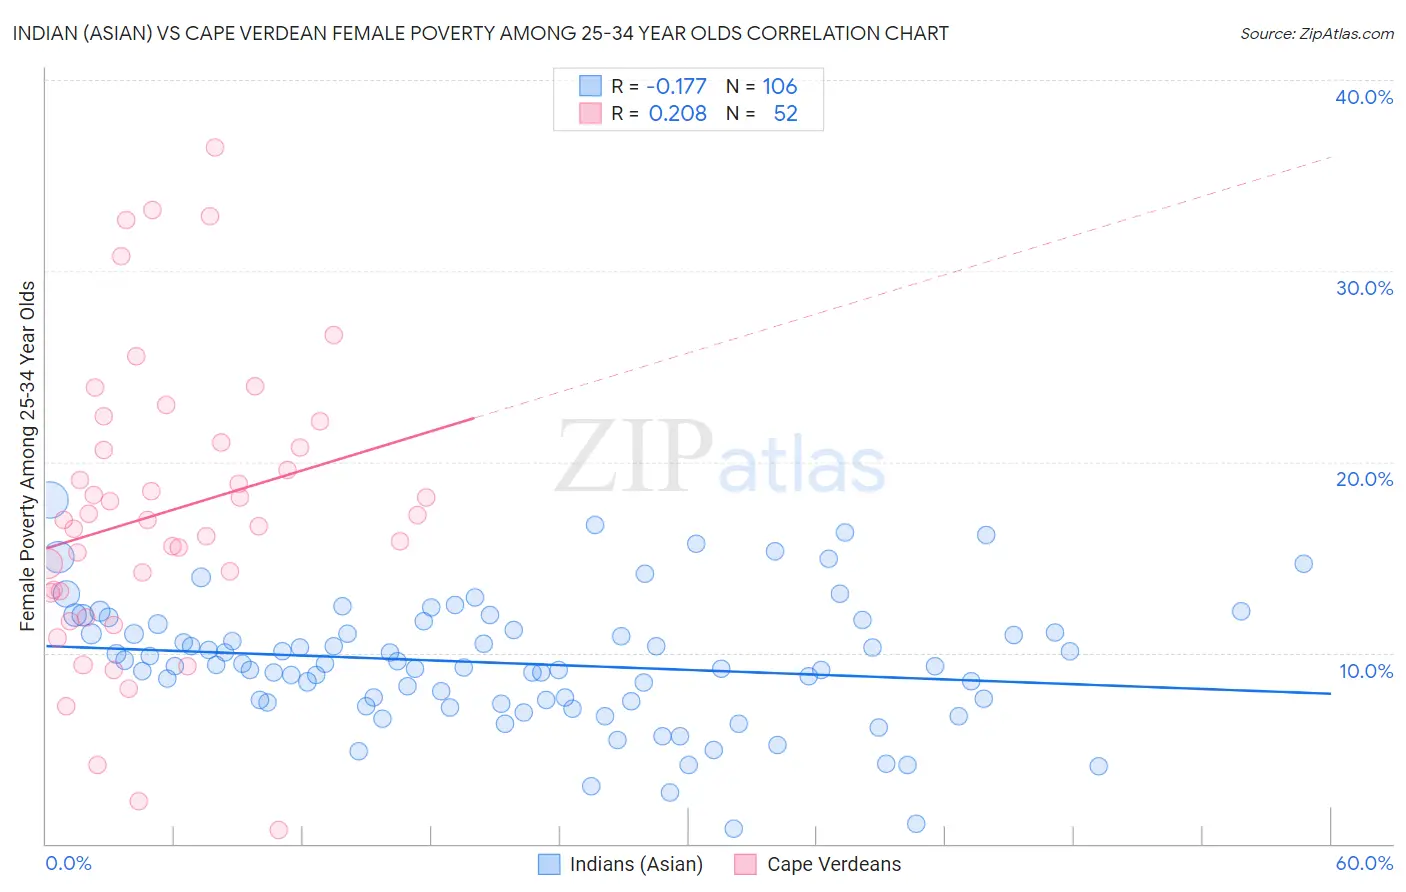 Indian (Asian) vs Cape Verdean Female Poverty Among 25-34 Year Olds